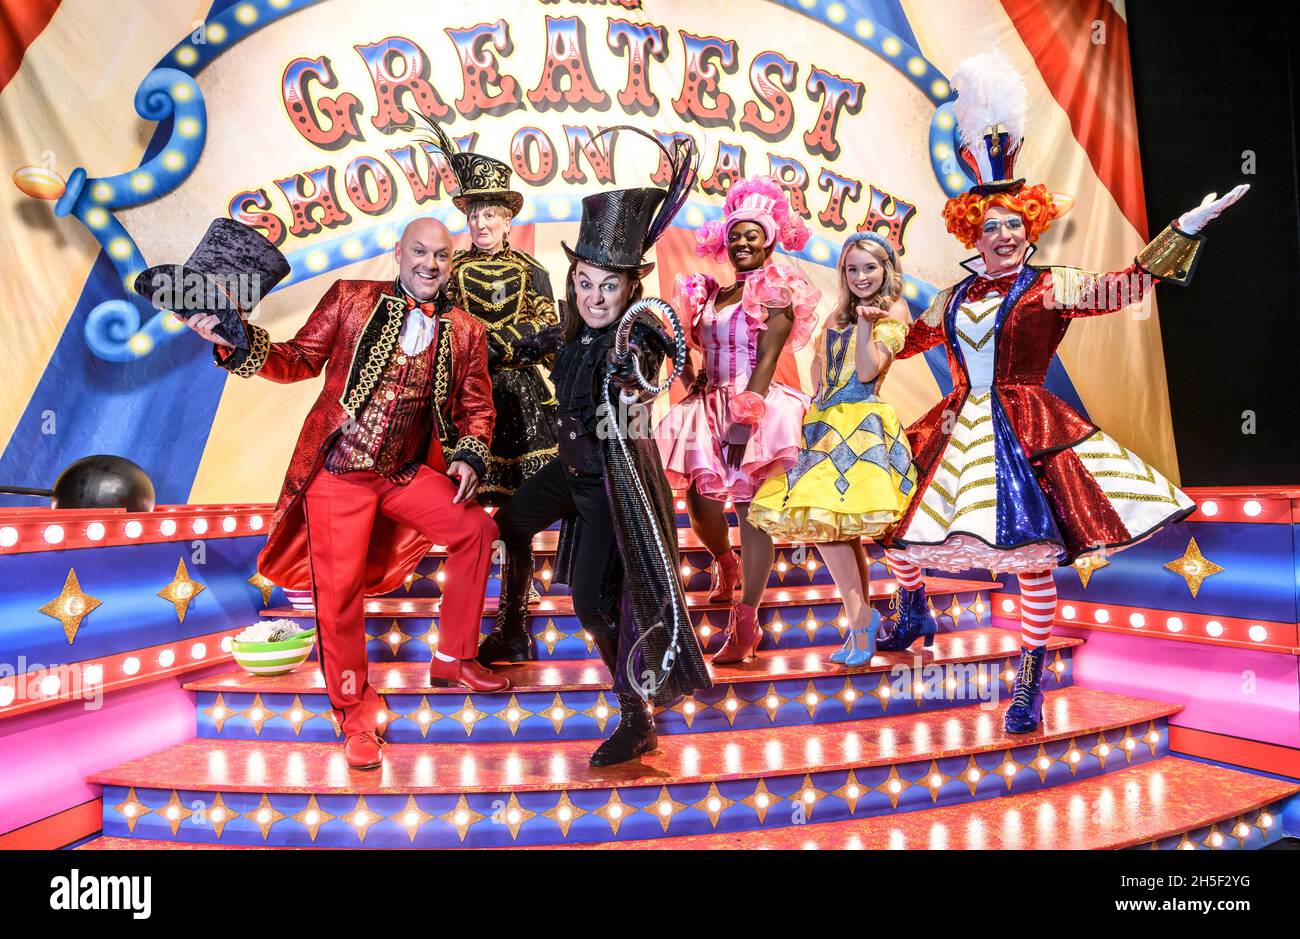 Birmingham Hippodrome - Panto Photo Call for Goldilocks and the Three Bears. 20 September 2021. Pictured with the cast is Jason Donovan who is making his panto debut as the Evil Ringmaster. Stock Photo